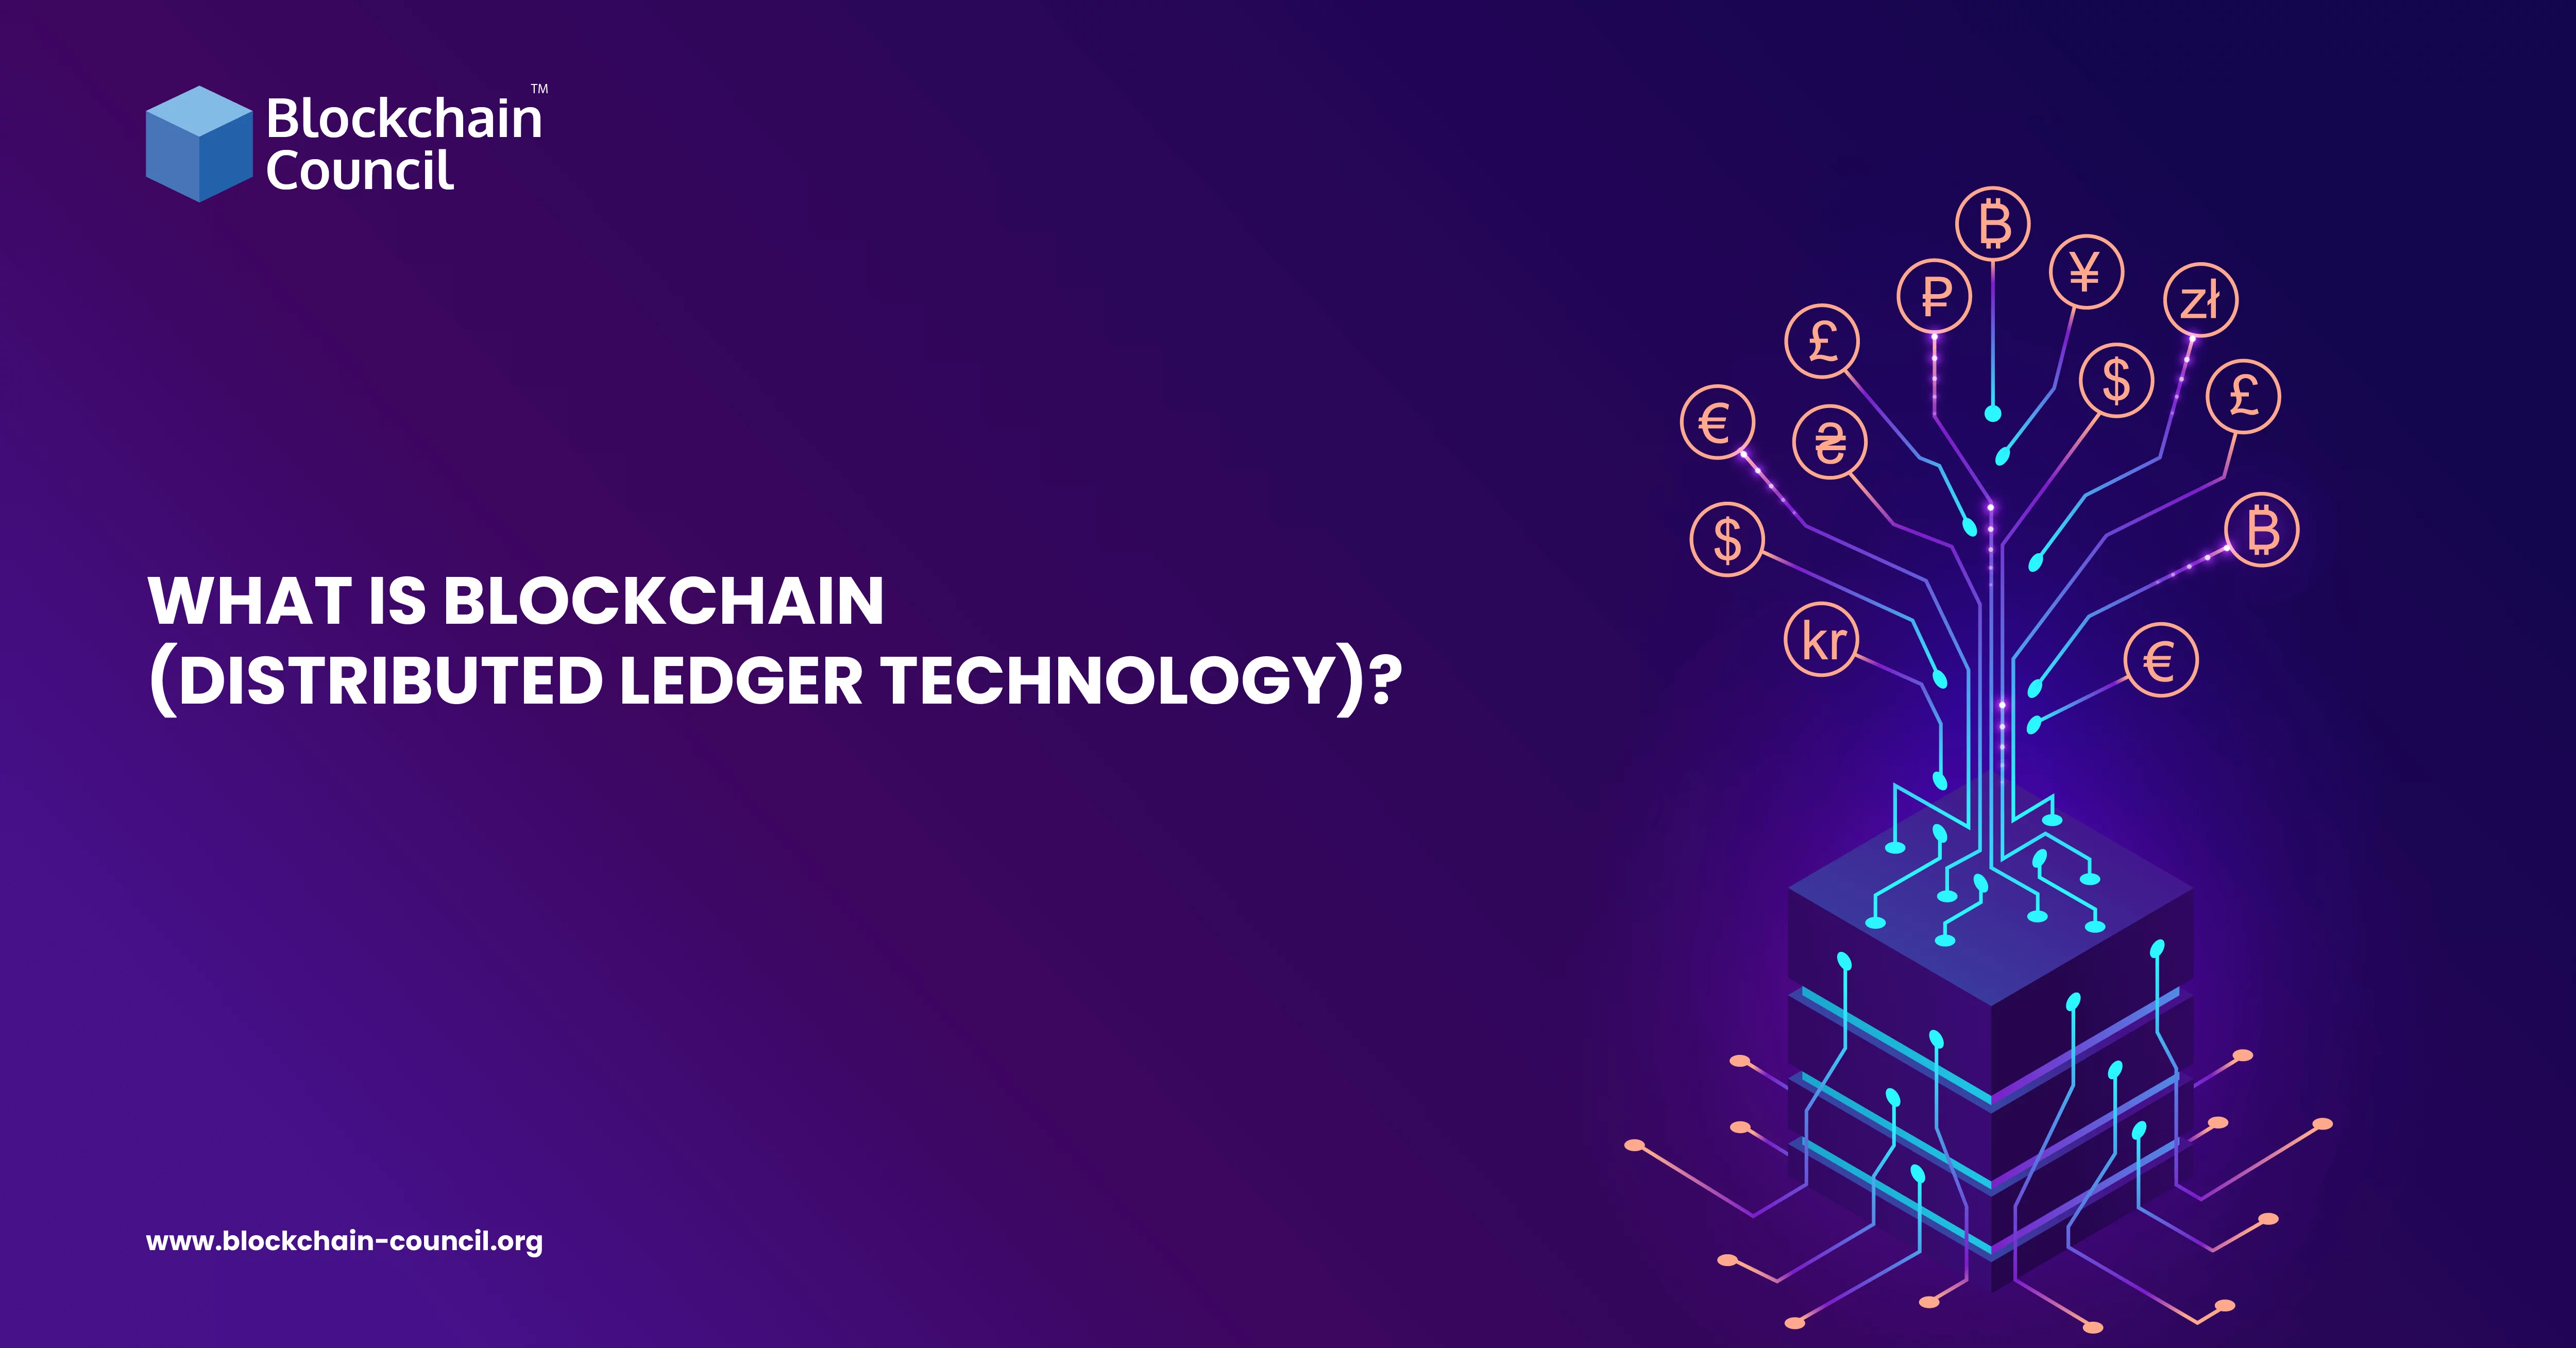 WHAT IS BLOCKCHAIN DISTRIBUTED LEDGER TECHNOLOGY